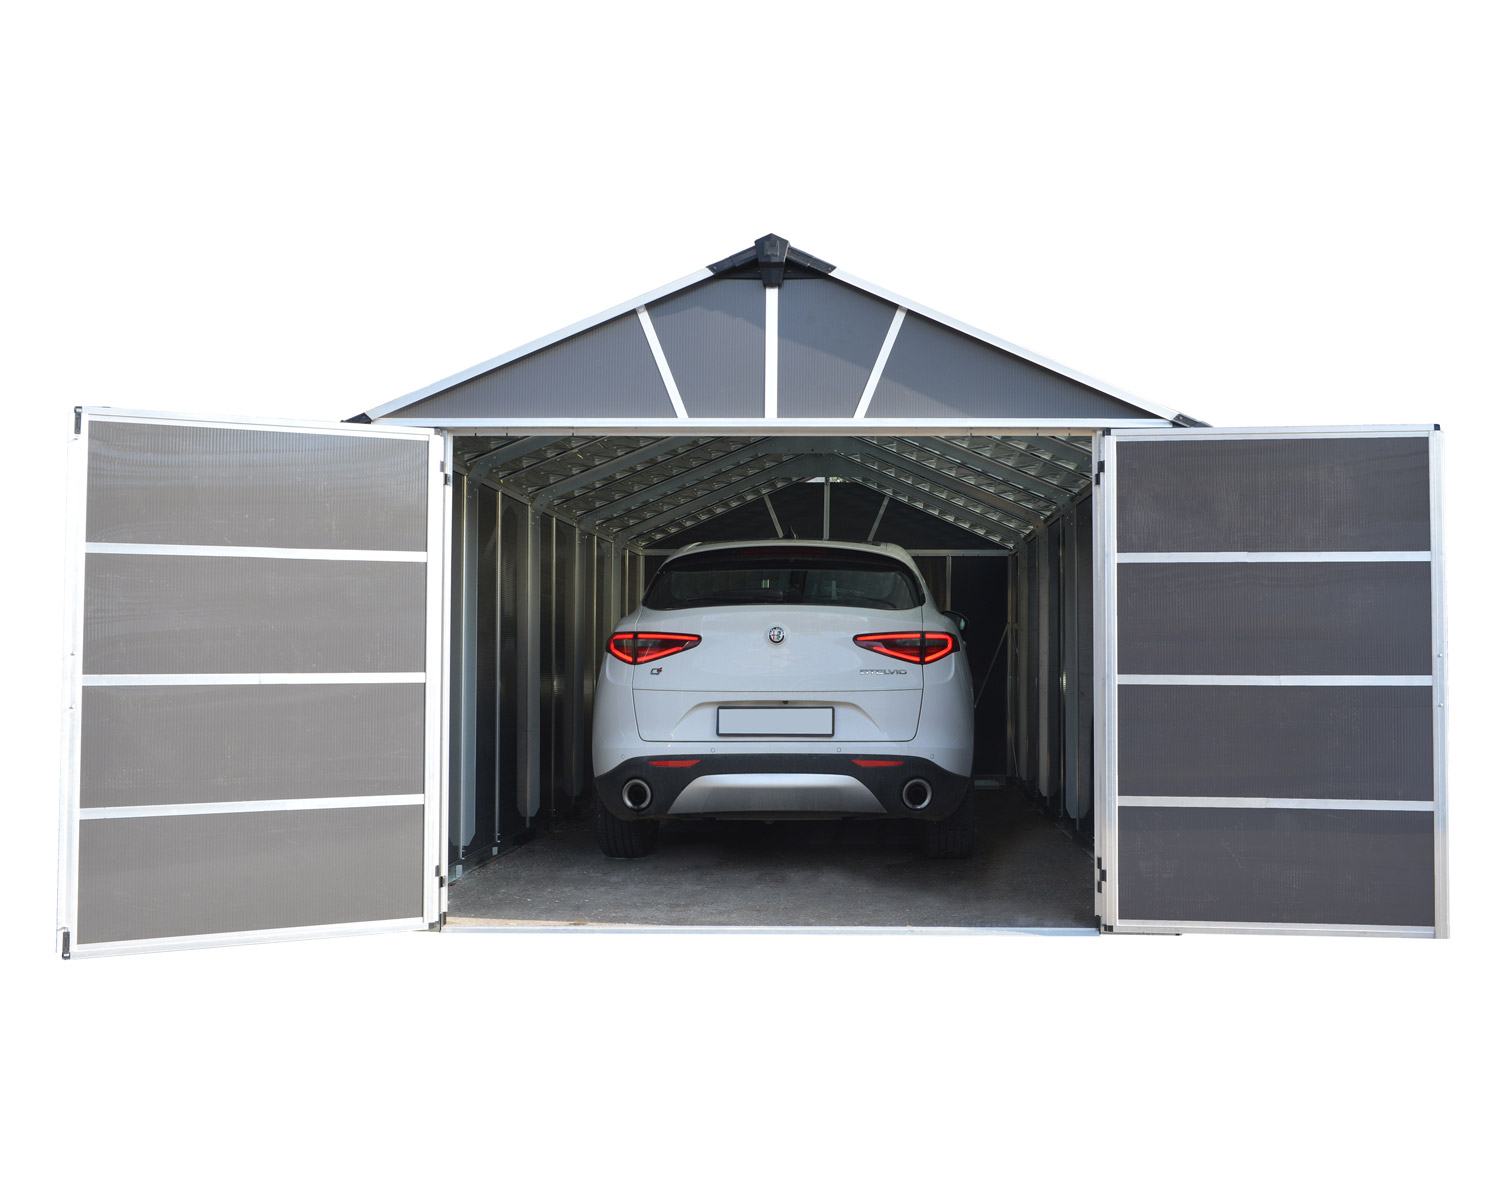 Yukon 11' x 13' Dark Grey Polycarbonate Multiwall and Aluminum Frame. A vehicle parked in a Plastic Garage Shed with Double Door